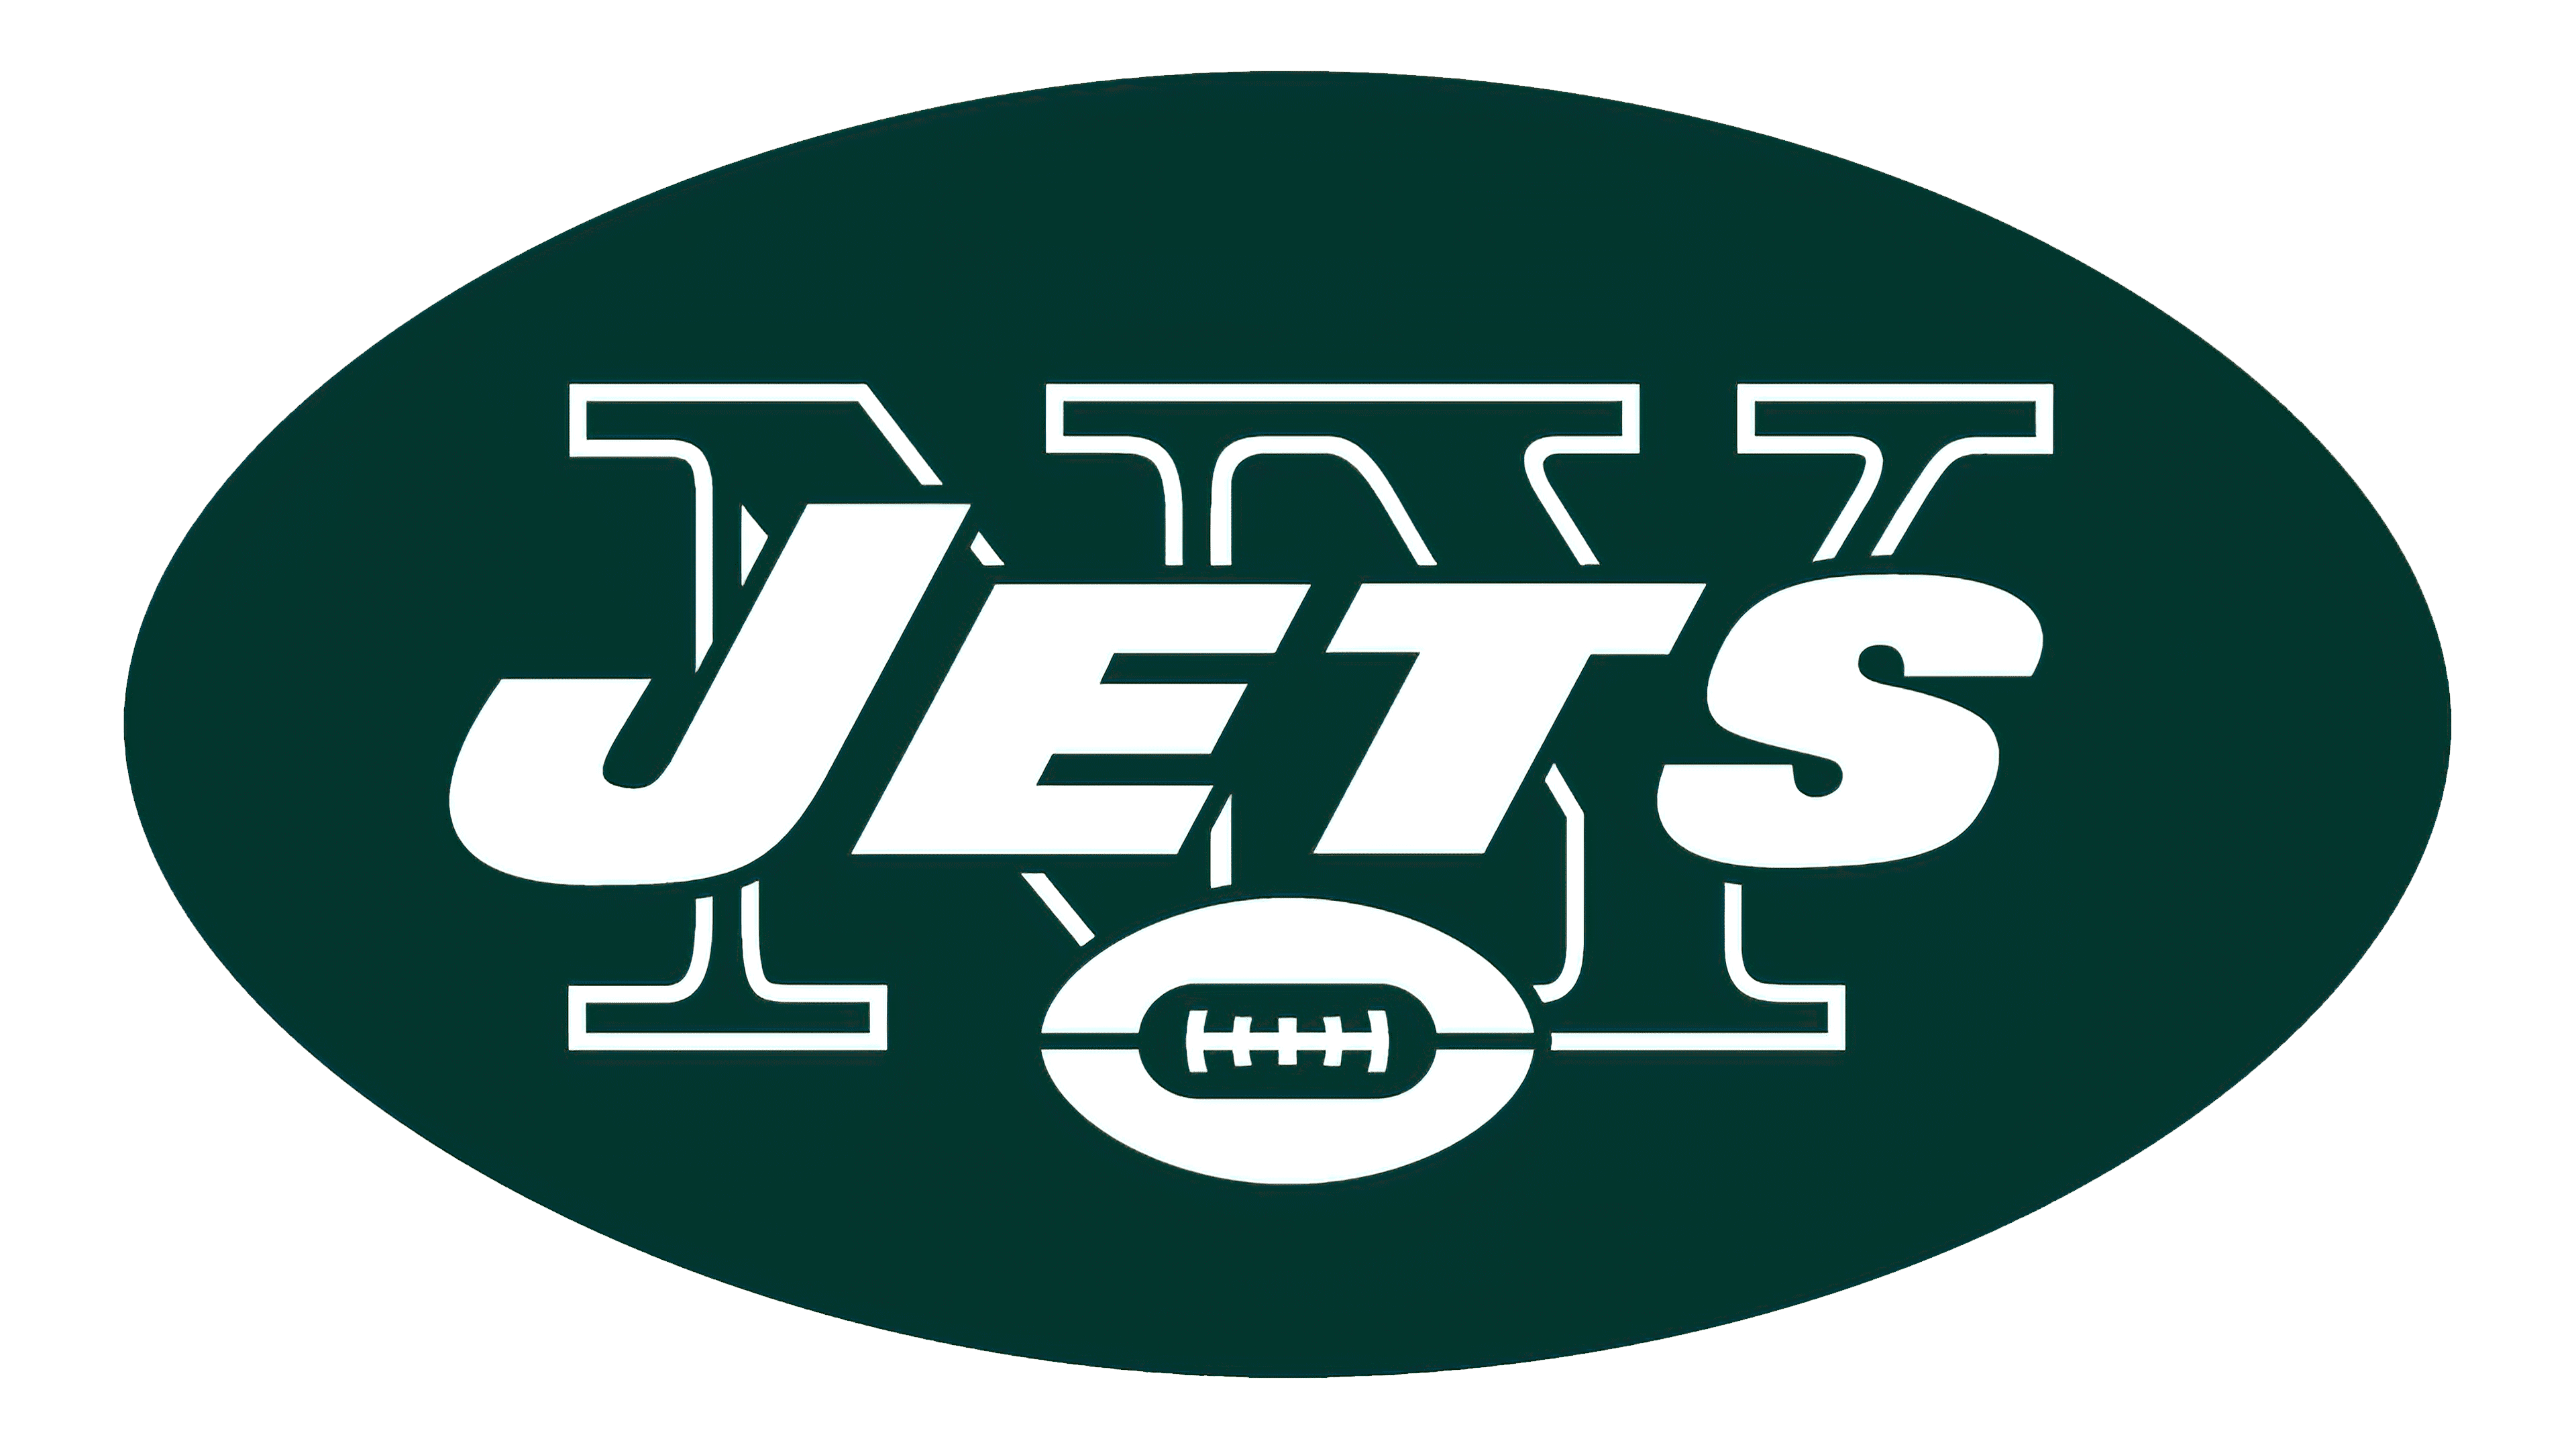 Logos and uniforms of the New York Jets - Wikipedia